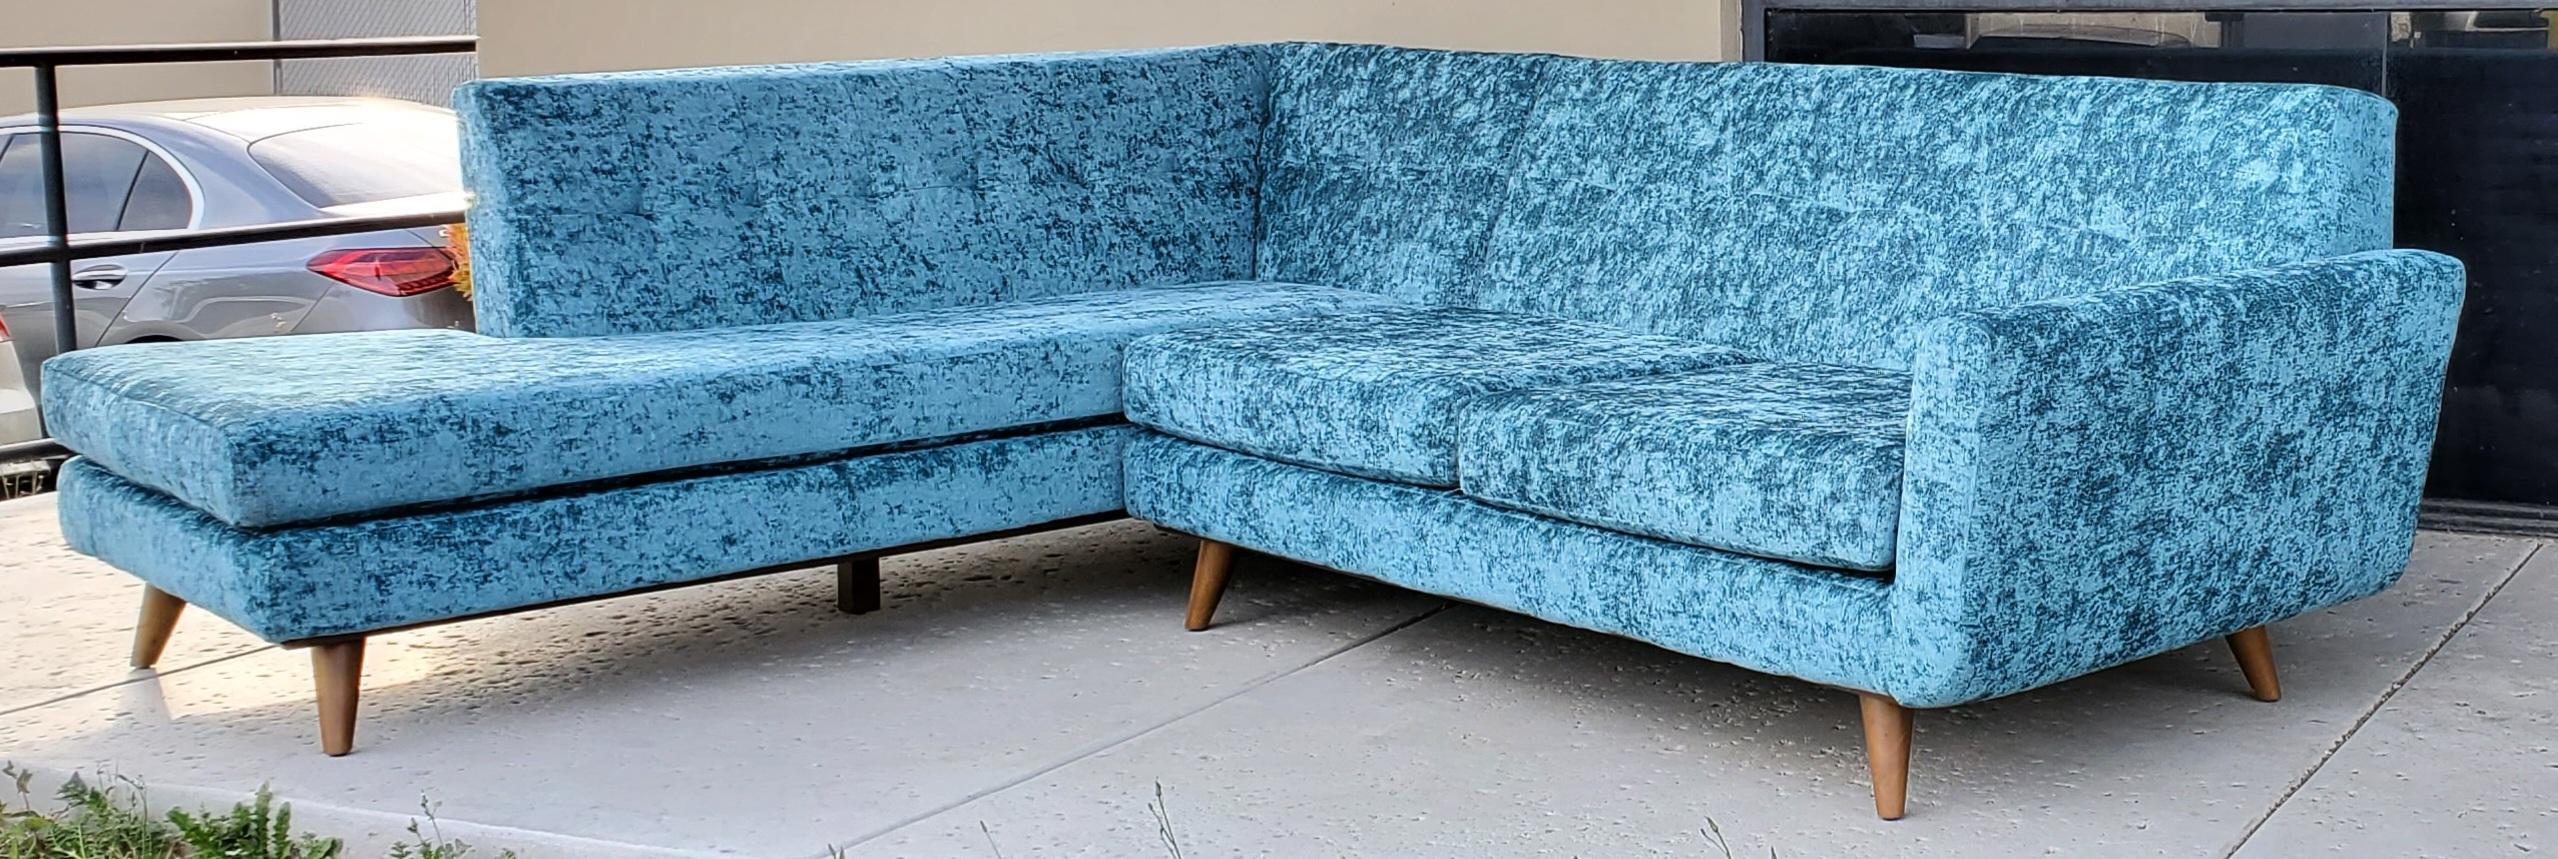 60s Low Slung Style Sectional Tapered Legs Aqua Green Crushed Velvet Upholstery For Sale 2